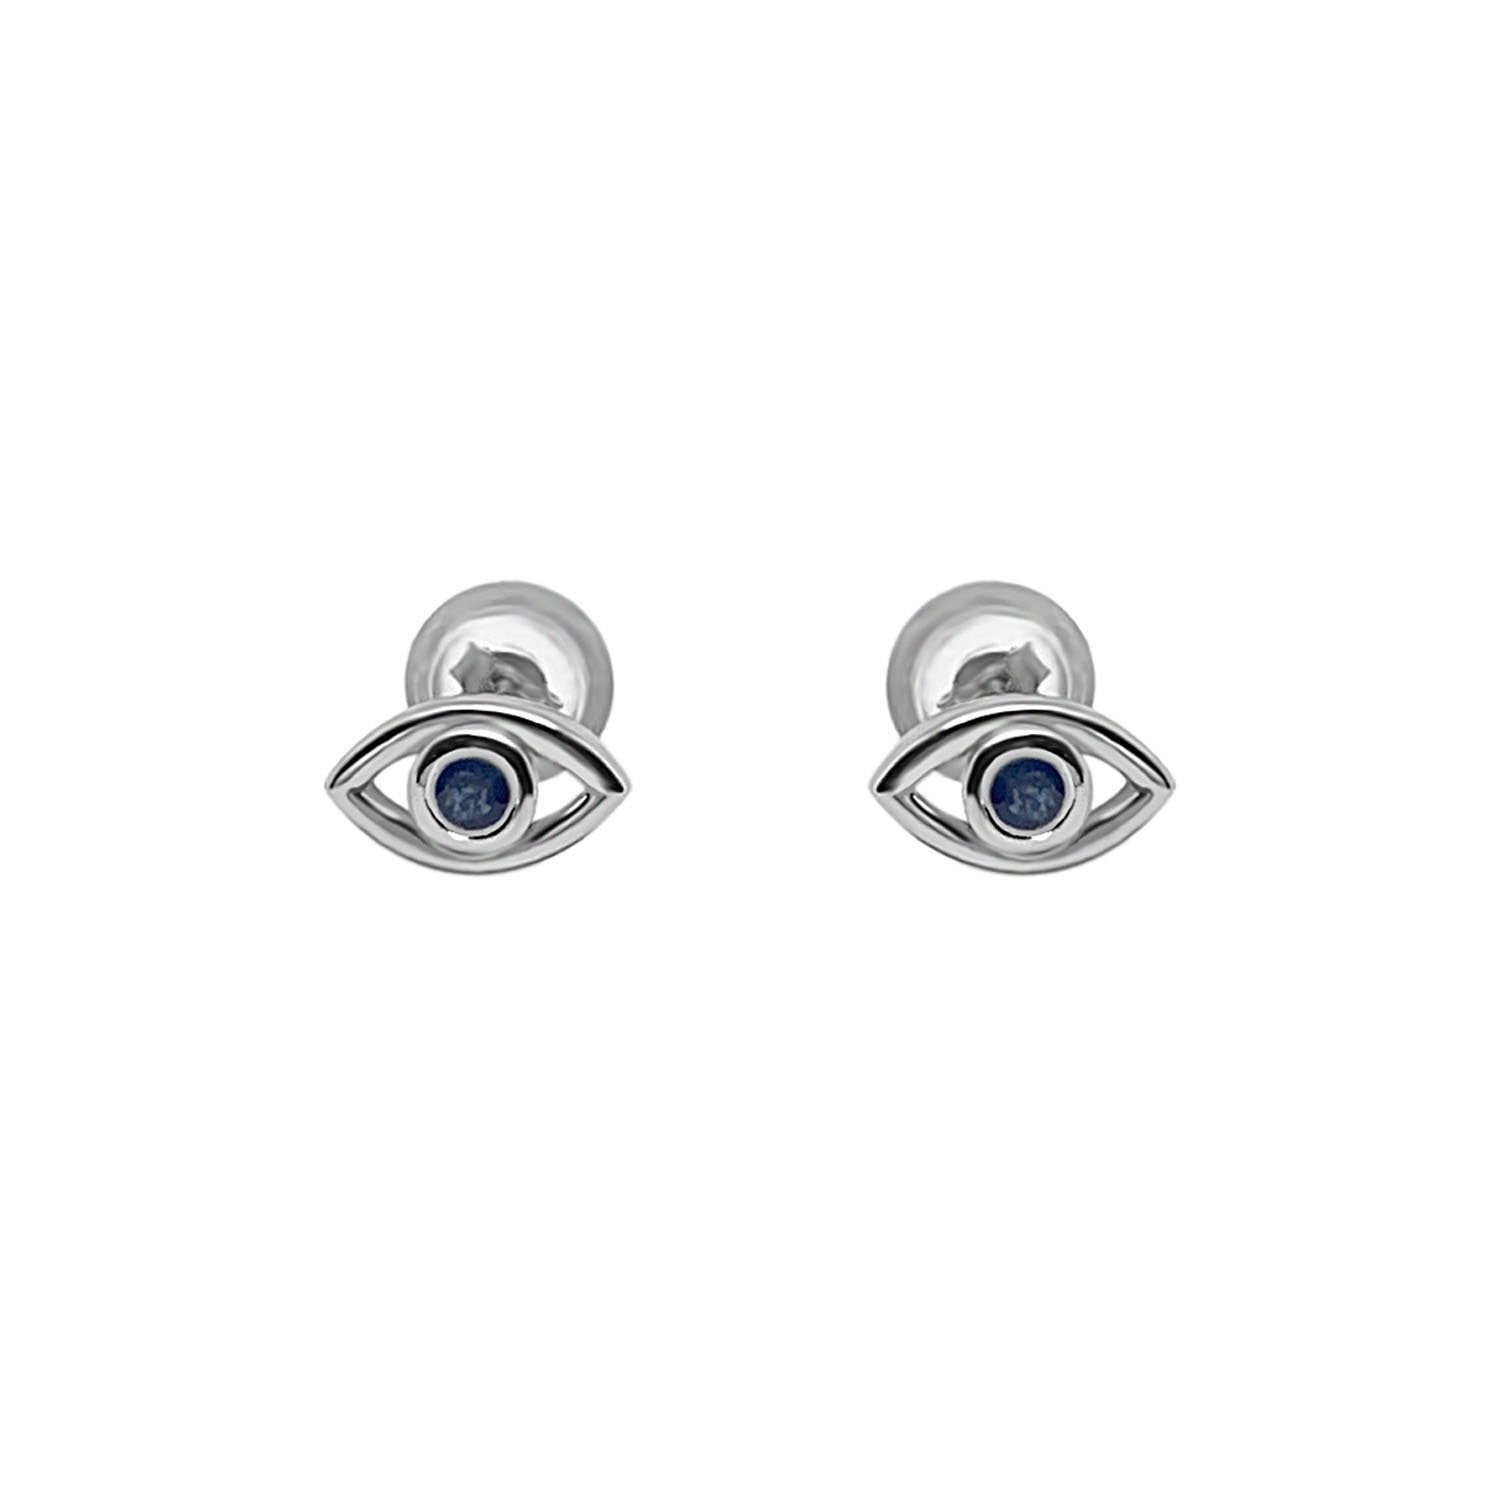 eye stud earrings blue sapphire stone sterling silver classic style kemmi collection